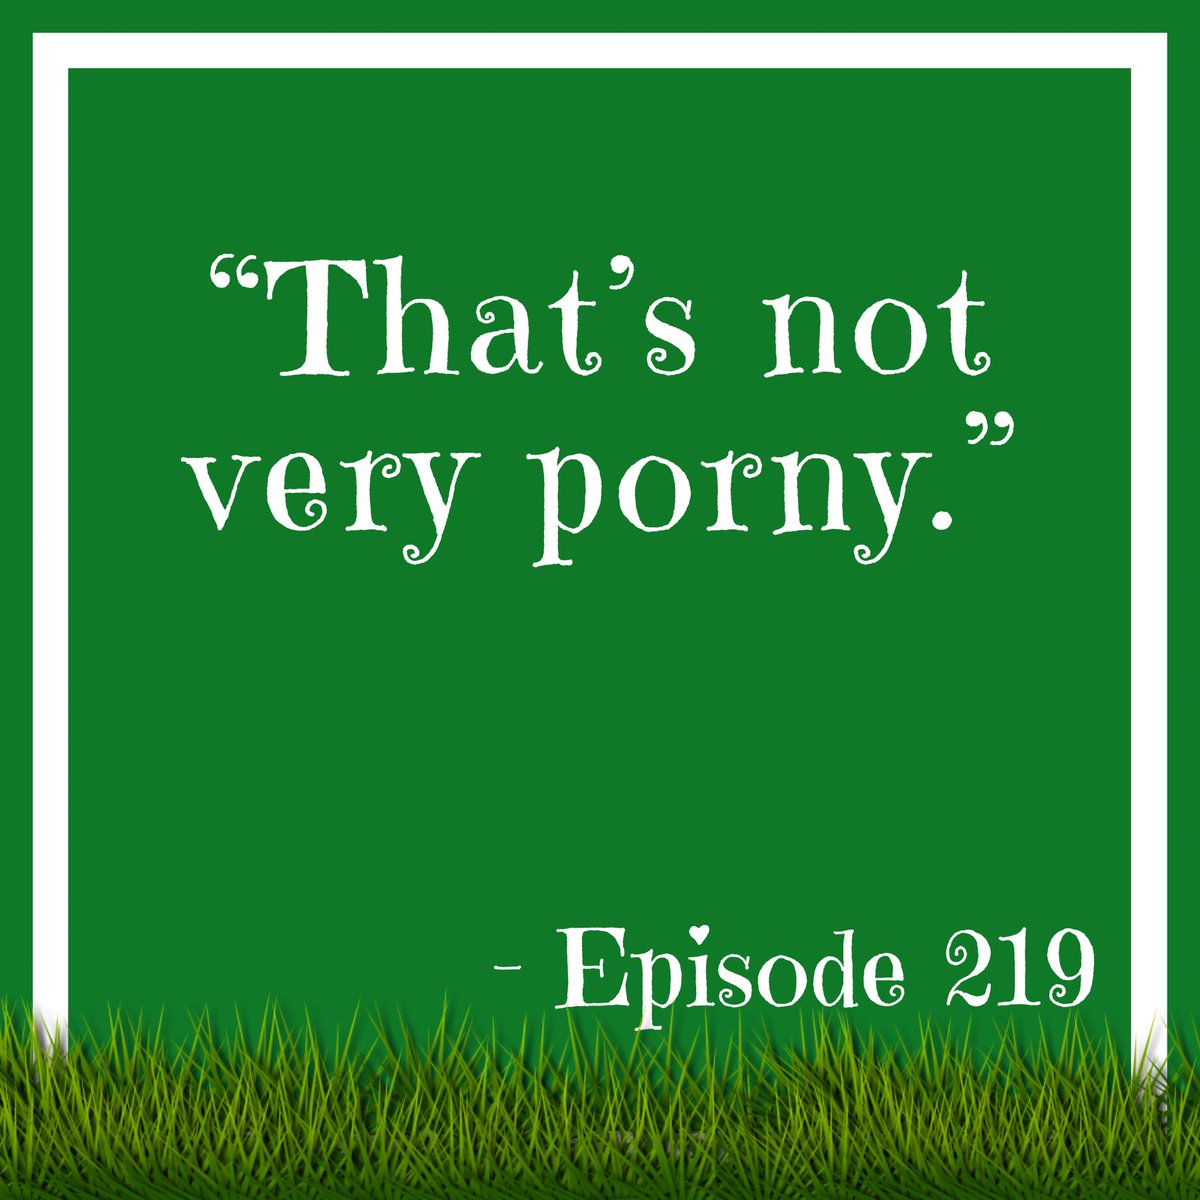 That’s What She Said #thegreenergrasspodcast #greenergrasspodcast #podcast #offthetonguepodcastnetwork #wouldyourather #pro #con #youhavetopickone #youtube #spotify #patreon #wwe #rocky #therock #dwaynetherockjohnson #sylvesterstallone #thatswhatshesaid #twss #porn